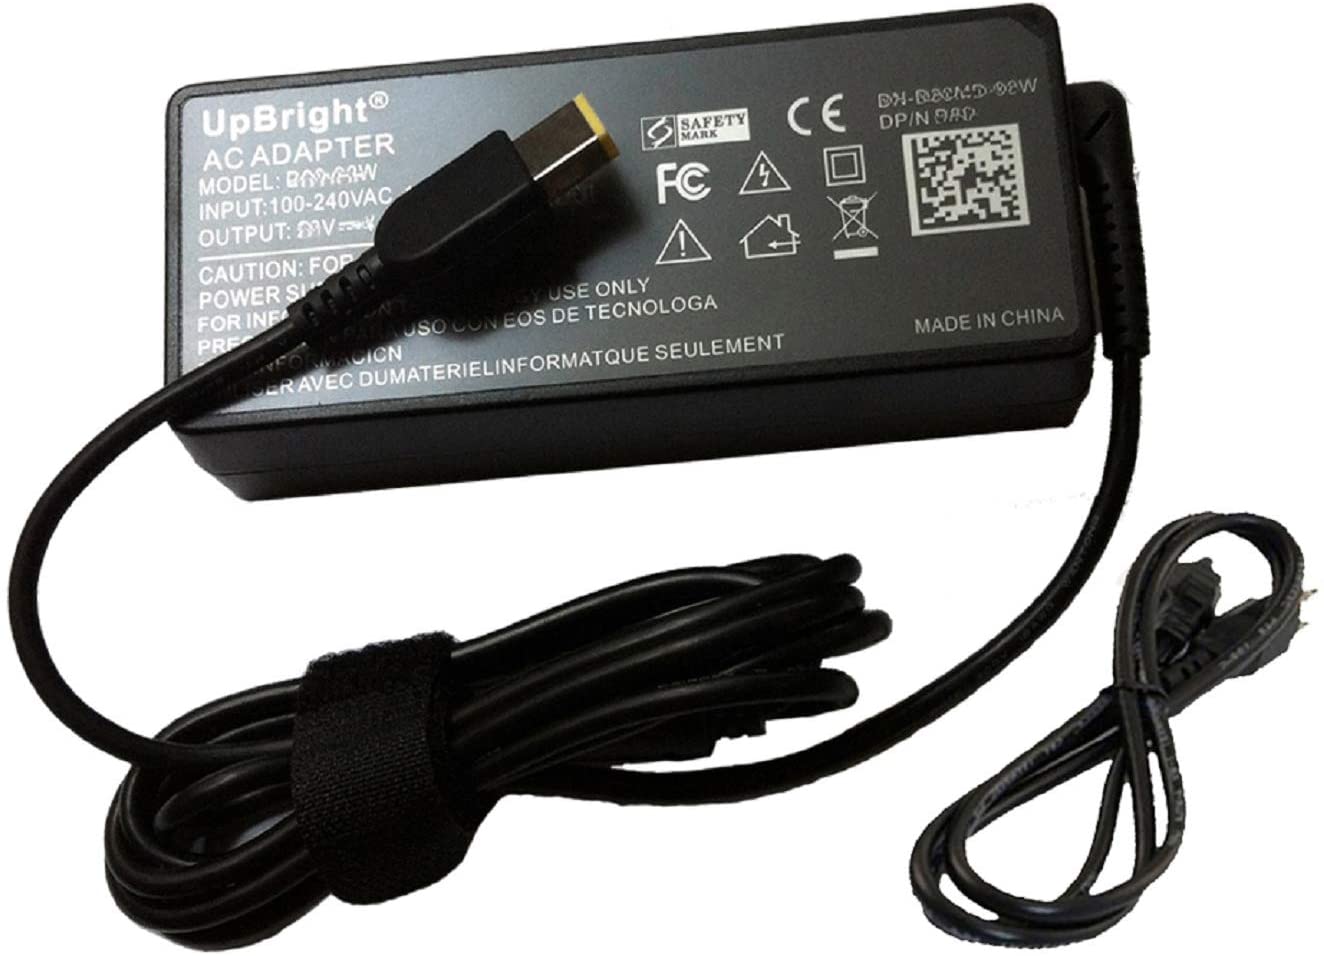 UPBRIGHT NEW AC/DC Adapter For Lenovo P/N 4X20E53337 4X20E53338 4X20E53339 4X20E53340 4X20E53341 4X20E53342 4X20E53343 4X20E53344 4X20E53345 Power Supply Cord Cable PS Charger Mains PSU - image 1 of 5